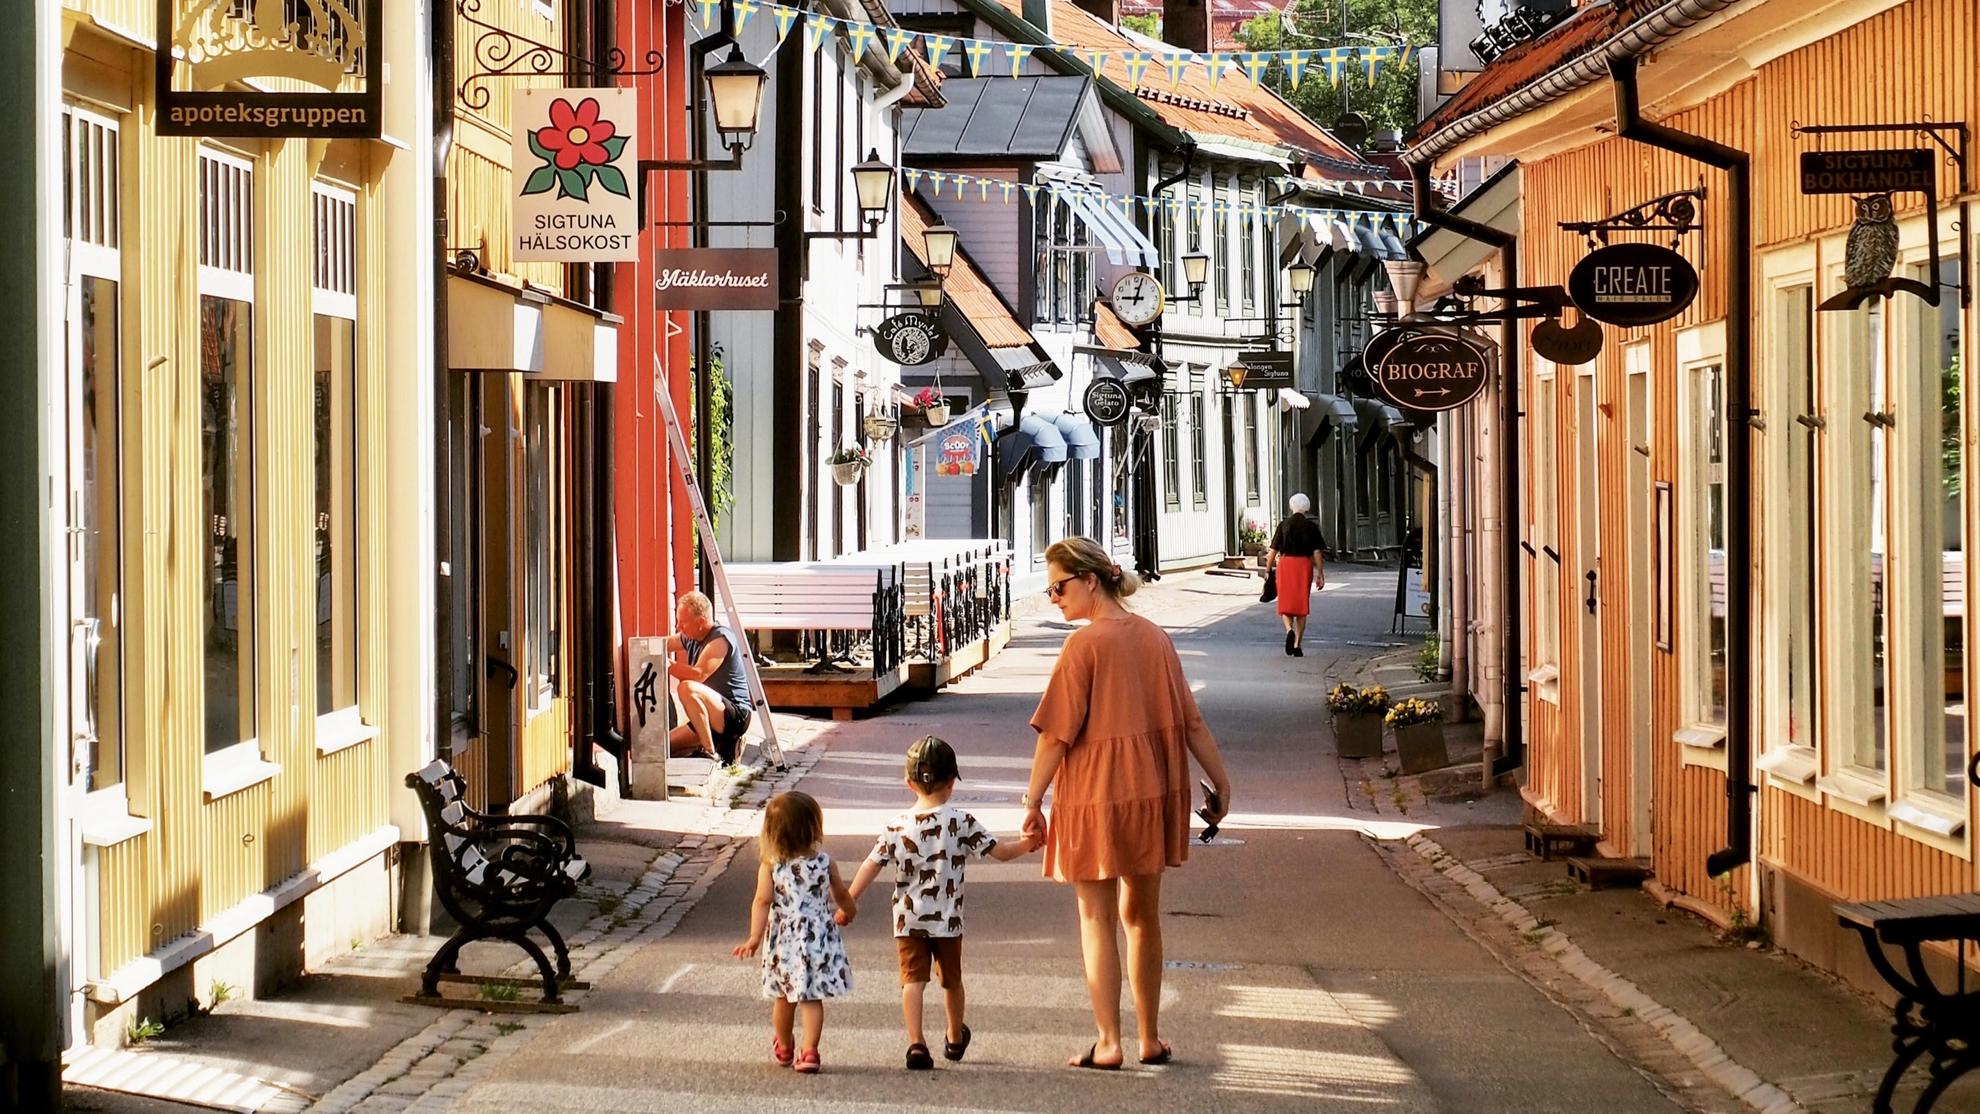 Woman in an orange dress with two small children walking through Sigtuna city center on a sunny summer day.